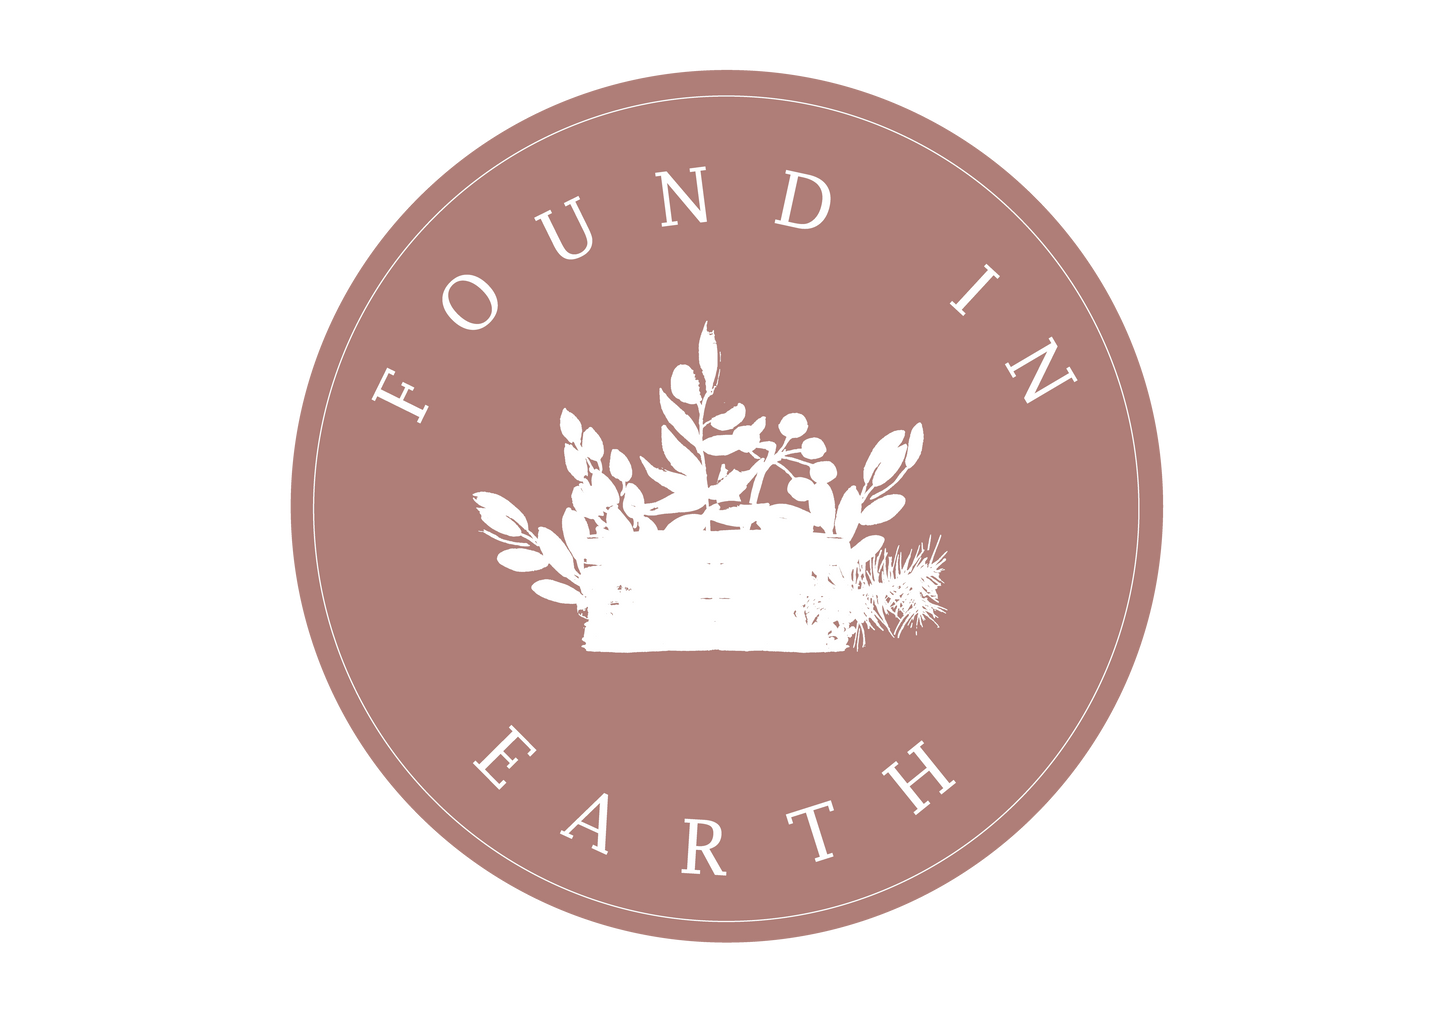 Found in Earth mono colour logo in dusty pink